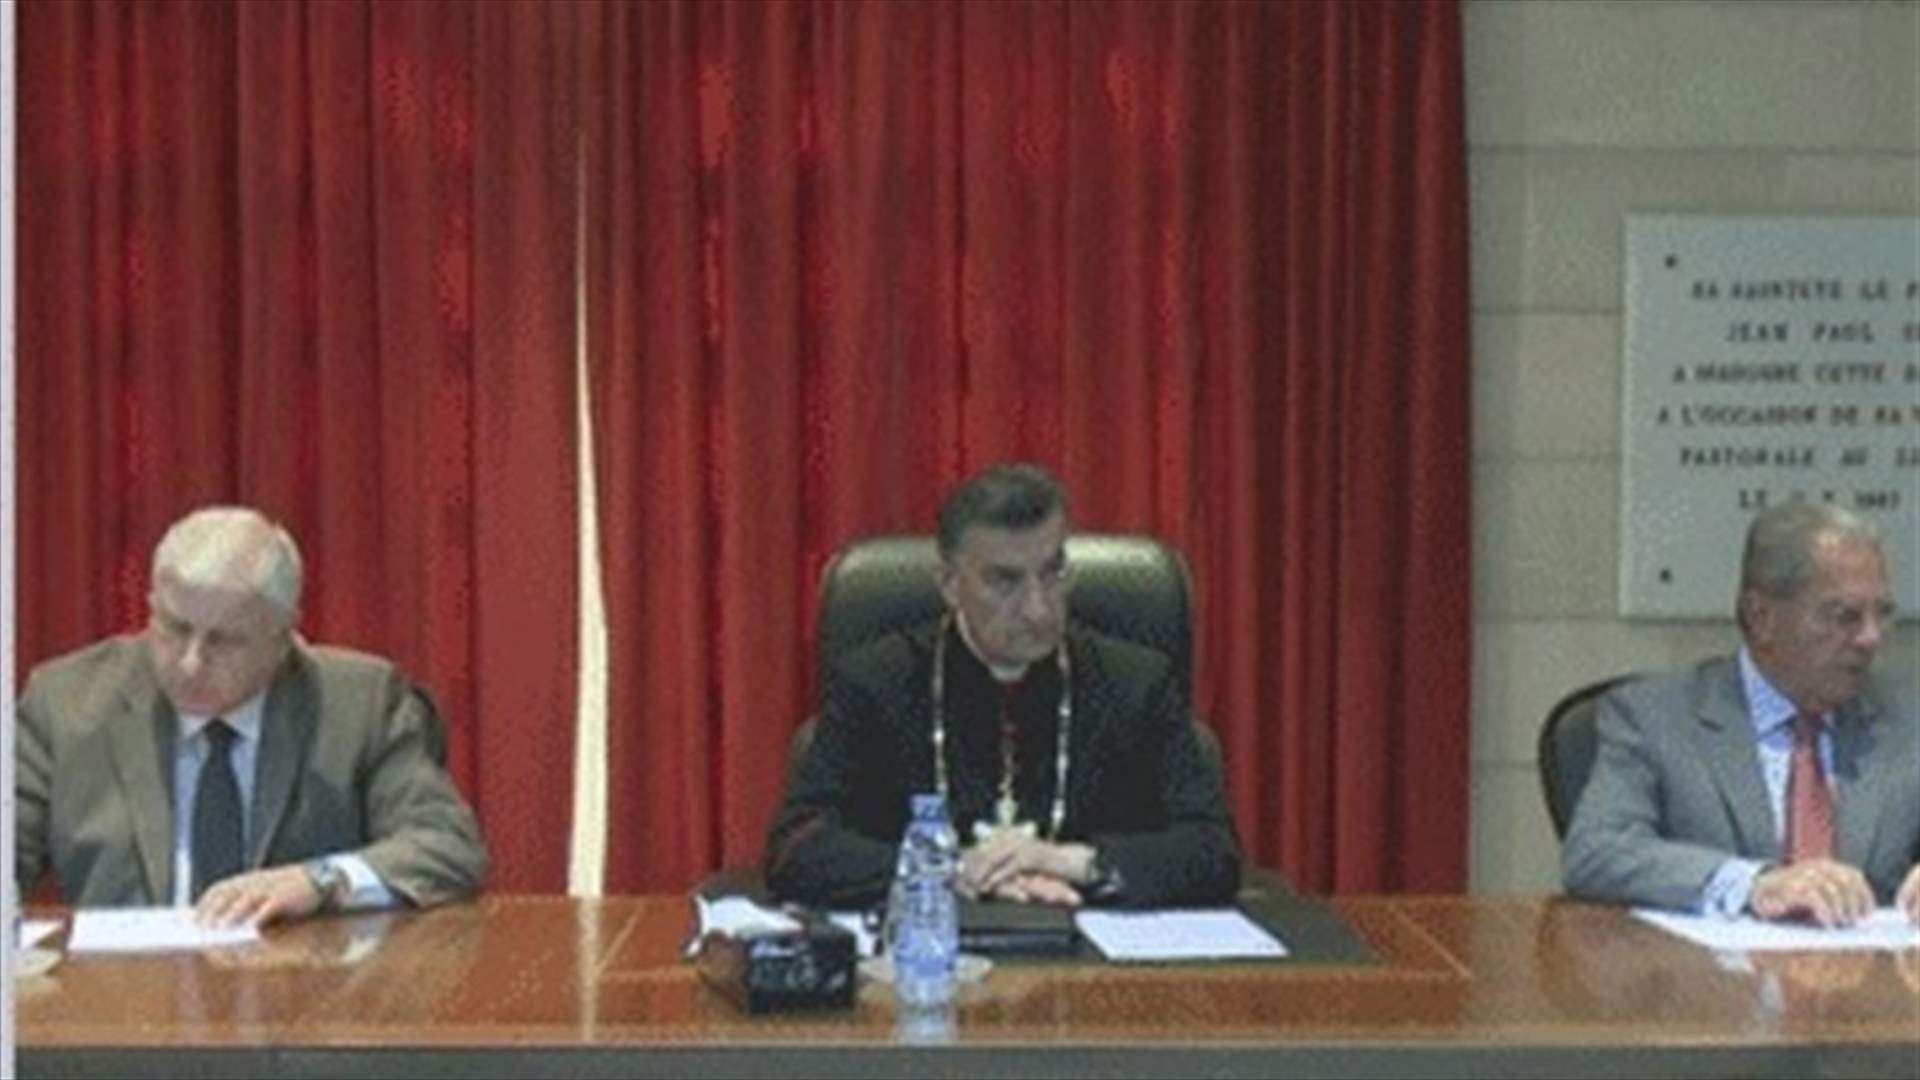 Patriarch Rai chairs meeting for Maronite institutions